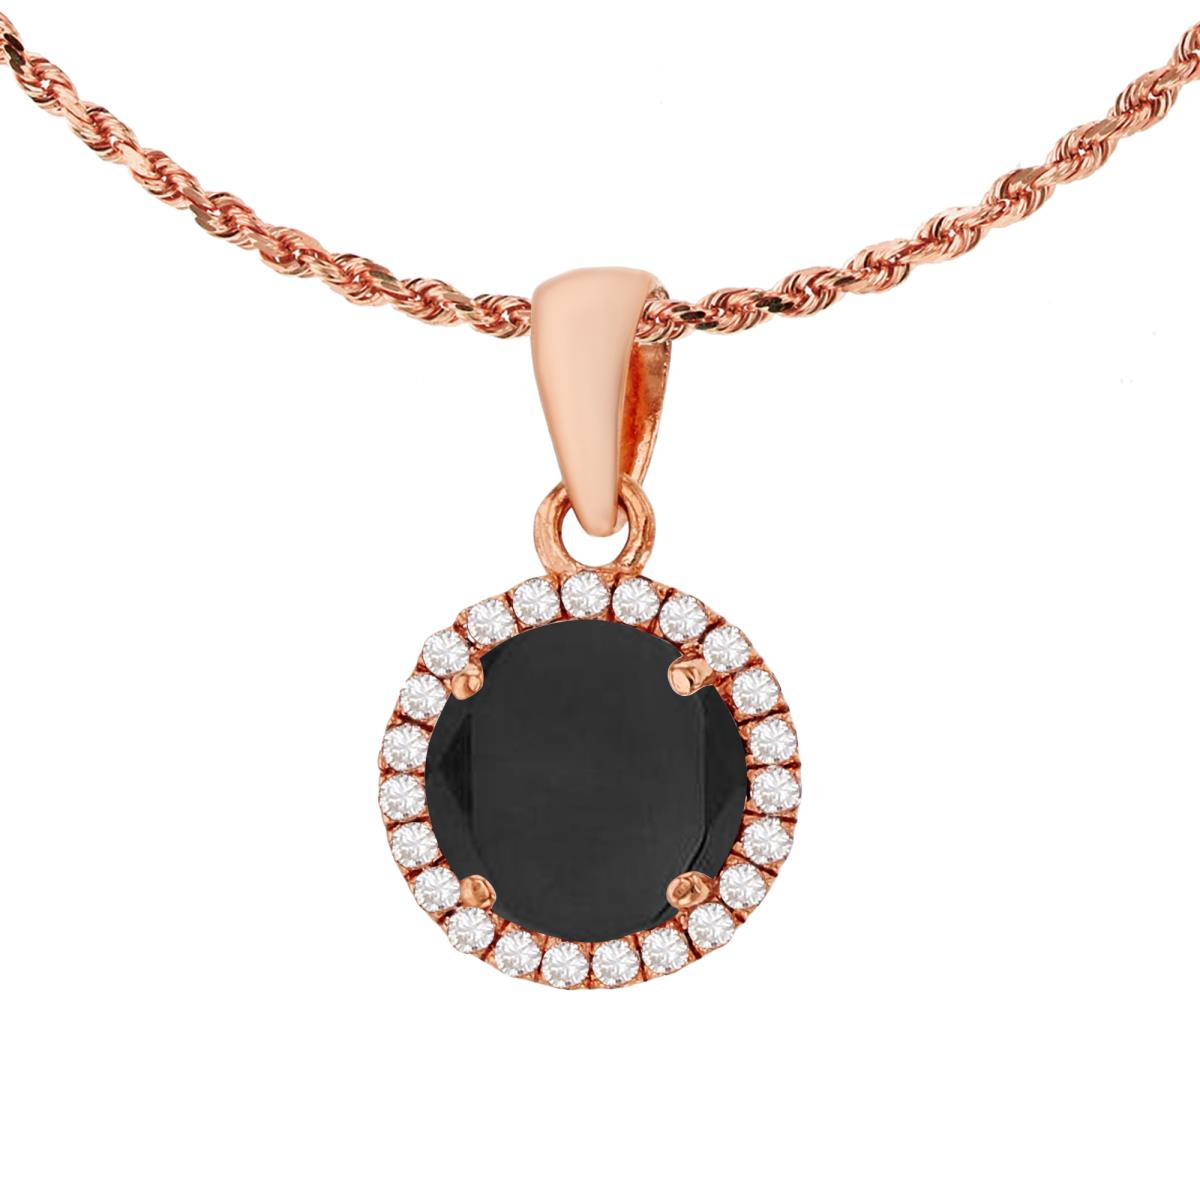 10K Rose Gold 7mm Round Onyx & 0.12 CTTW Diamond Halo 18" Rope Chain Necklace